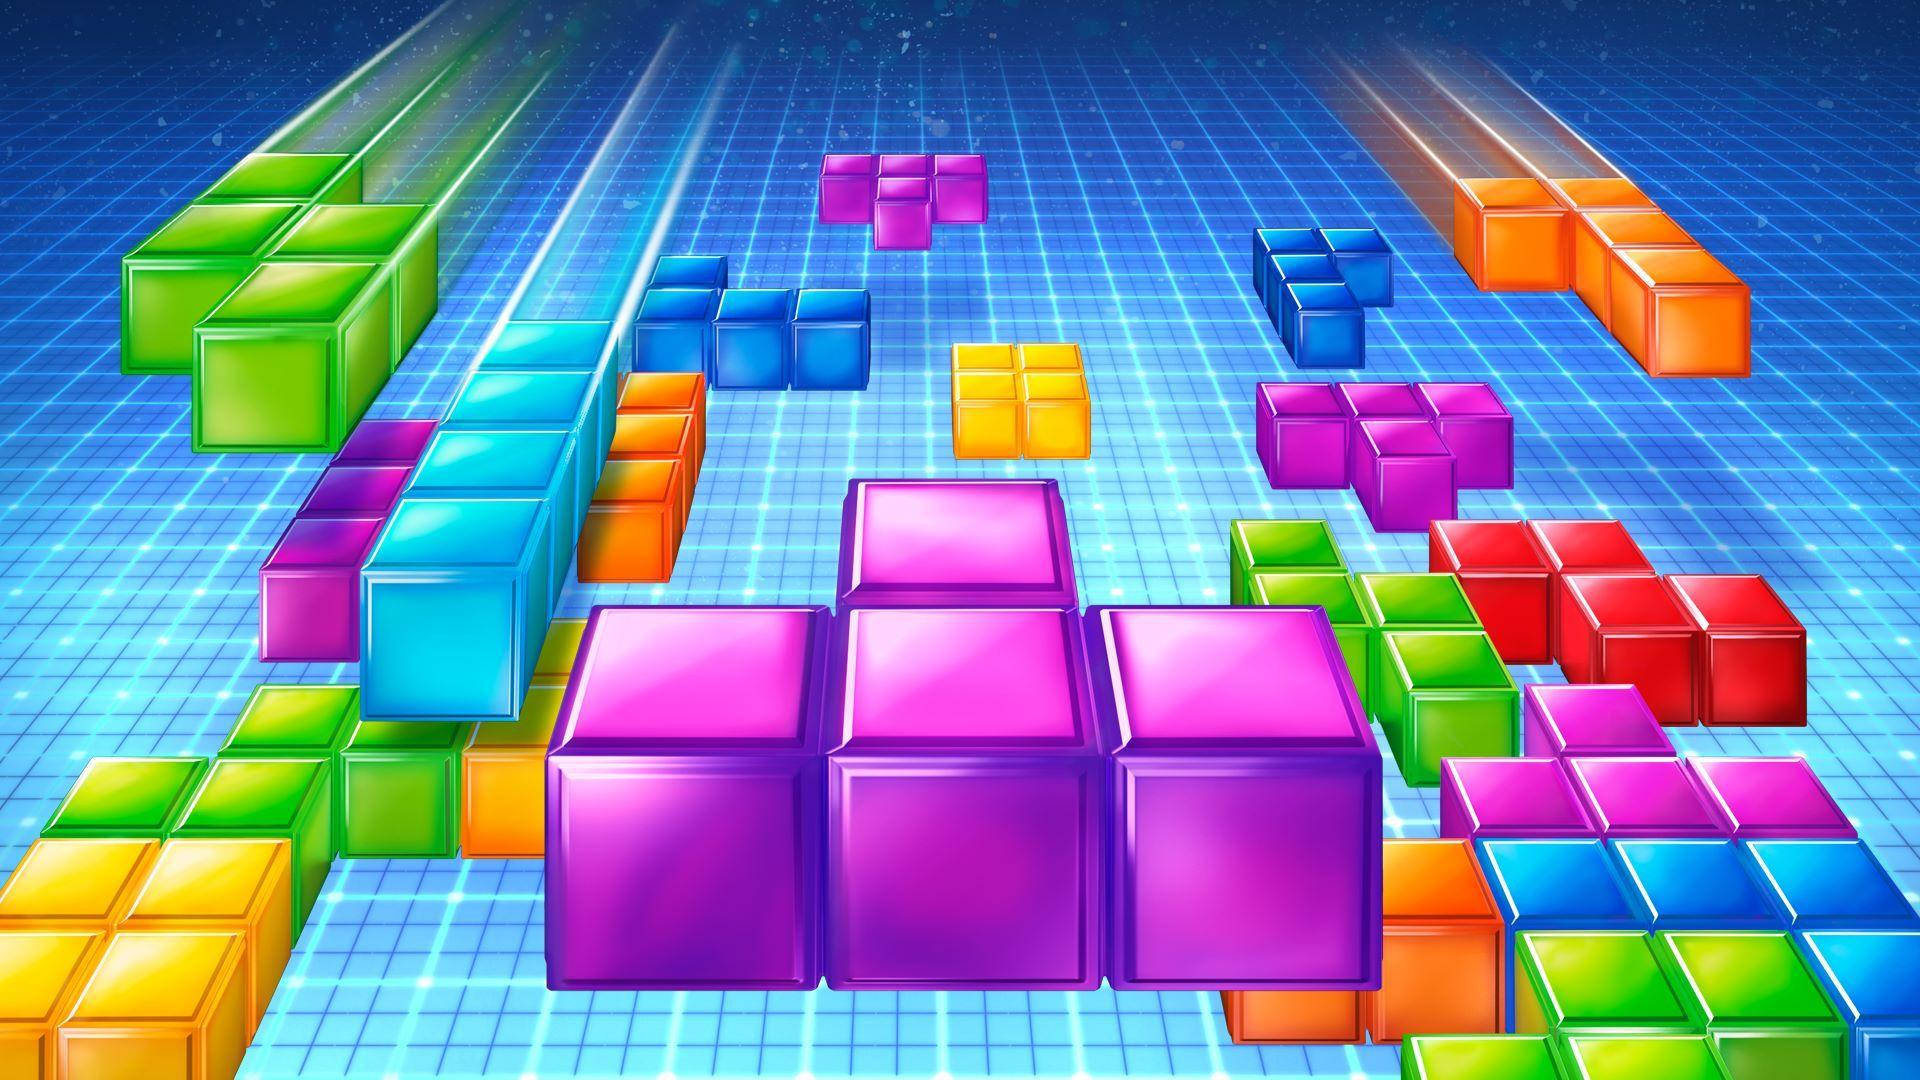 Free Tetris Pictures , [100+] Tetris Pictures for FREE 